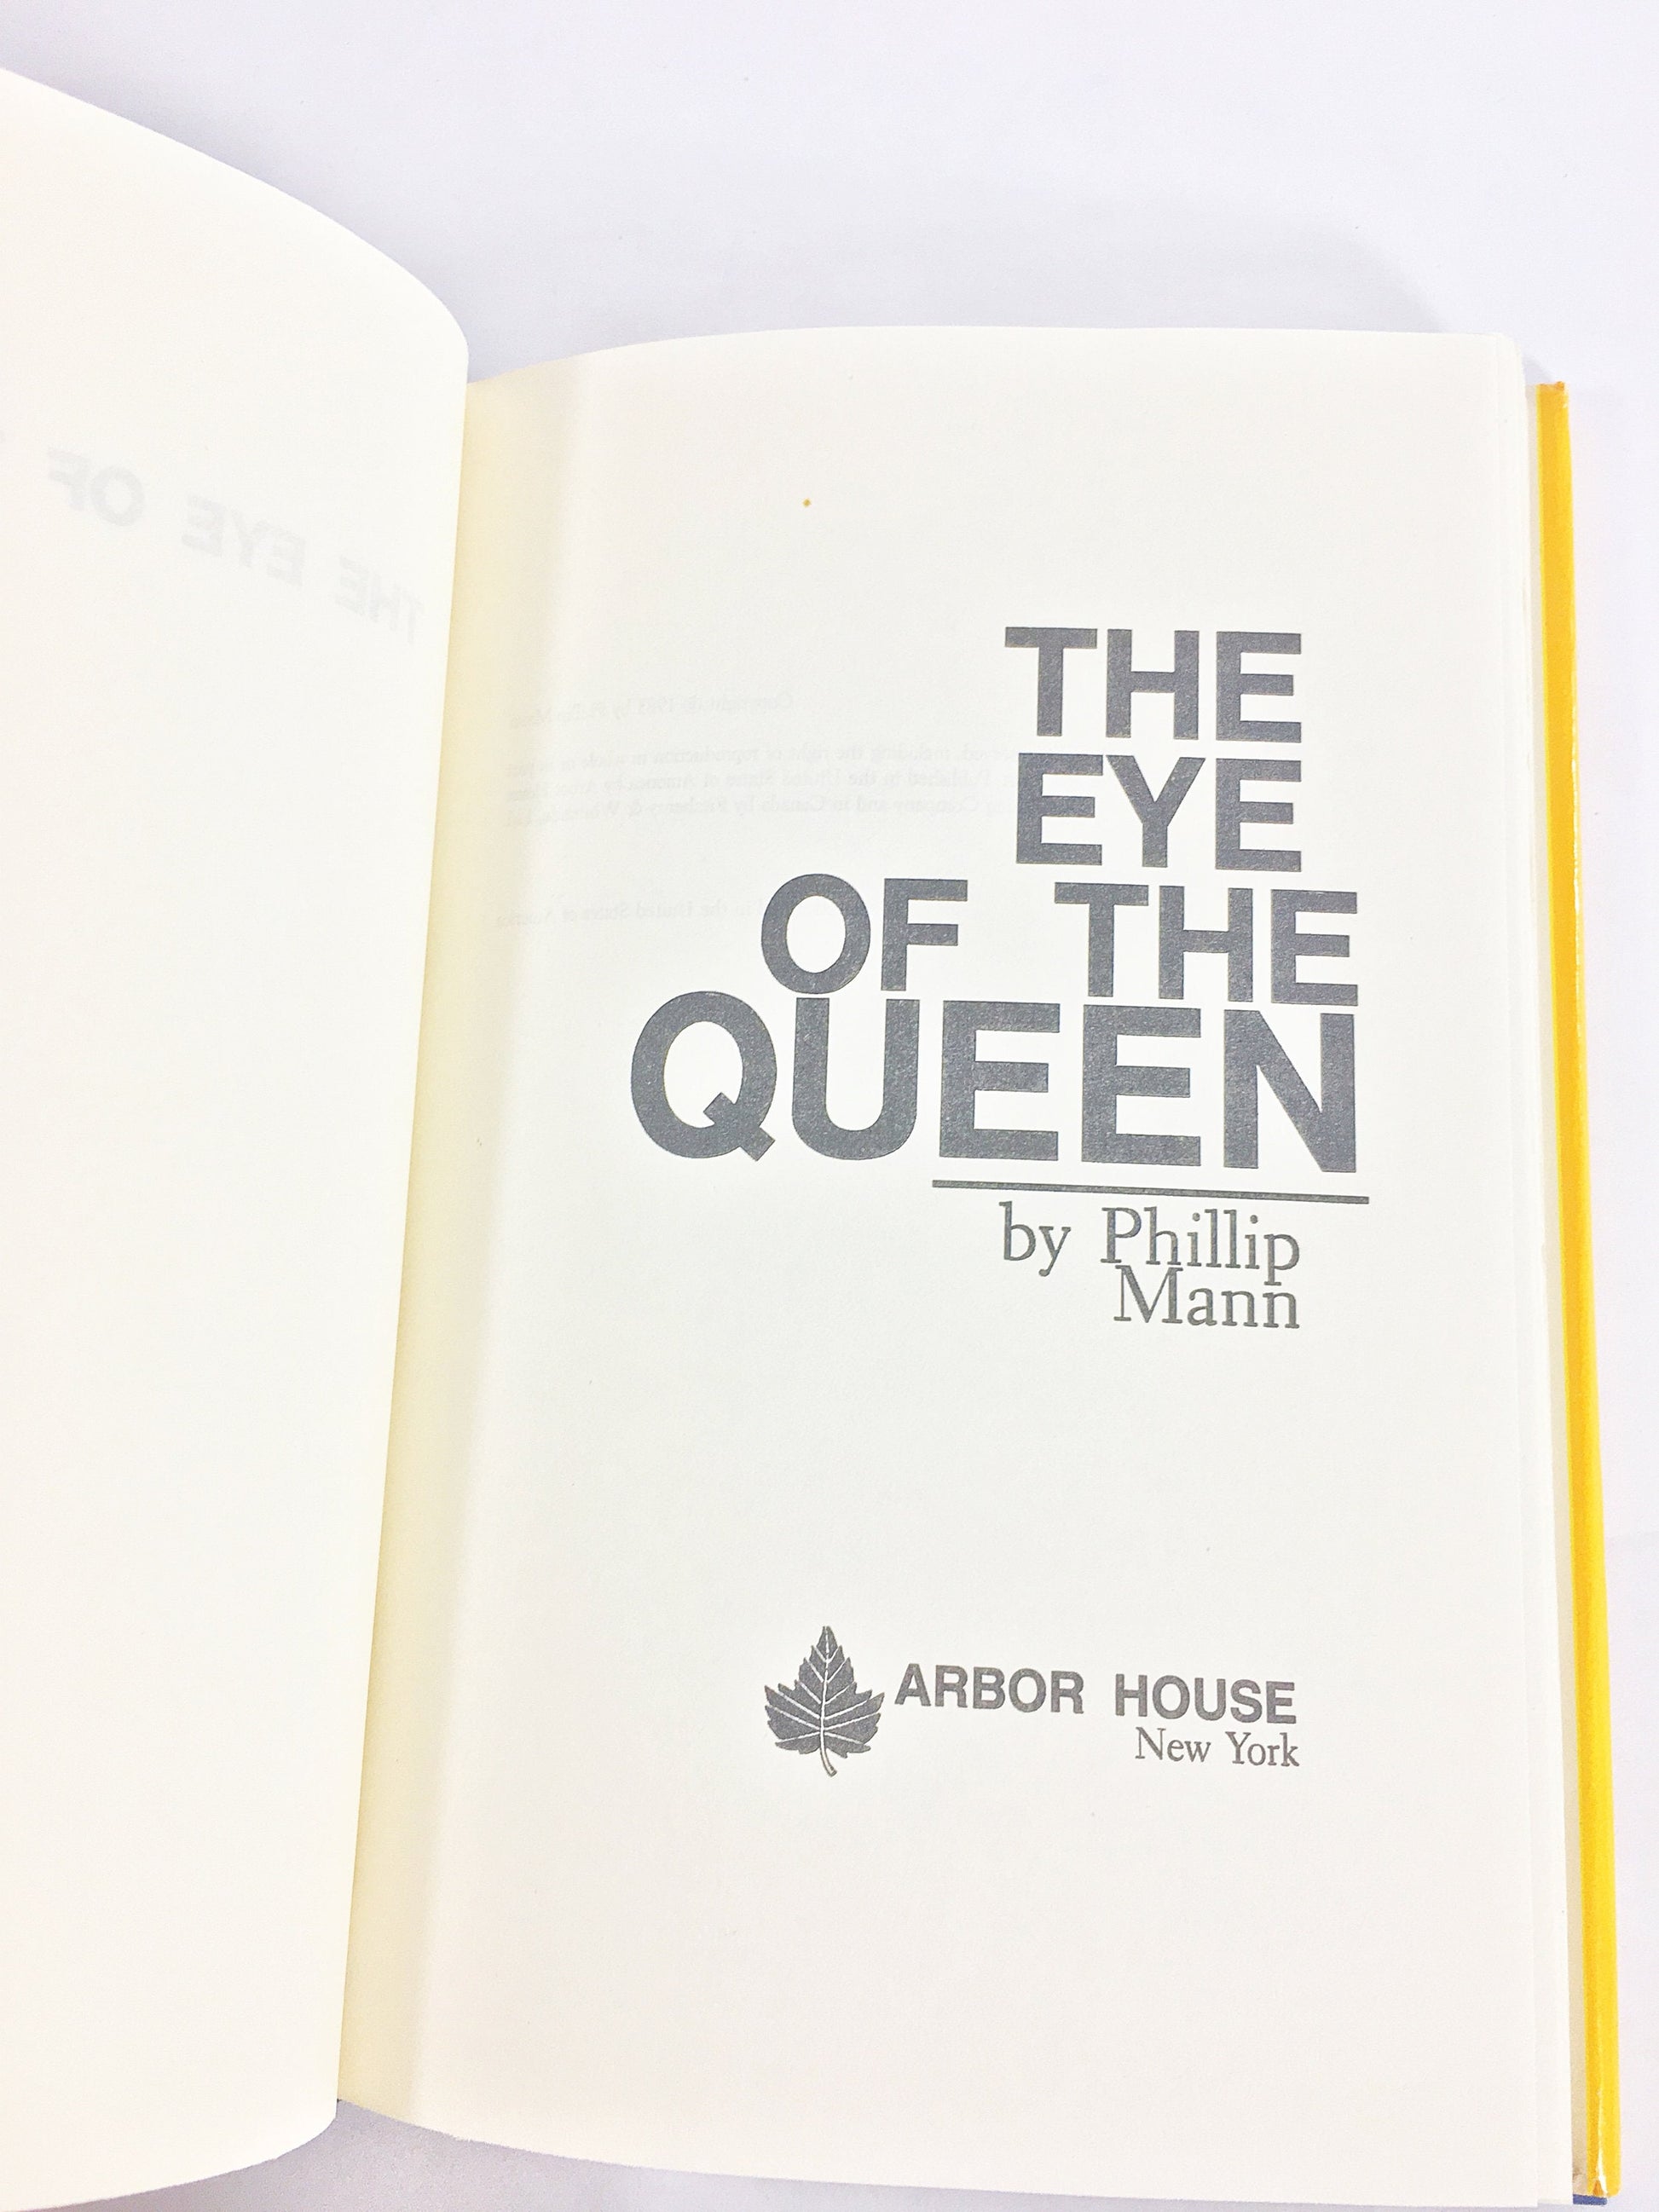 The Eye of the Queen by Phillip Mann - the creator of credible aliens. Vintage science fiction book circa 1983.